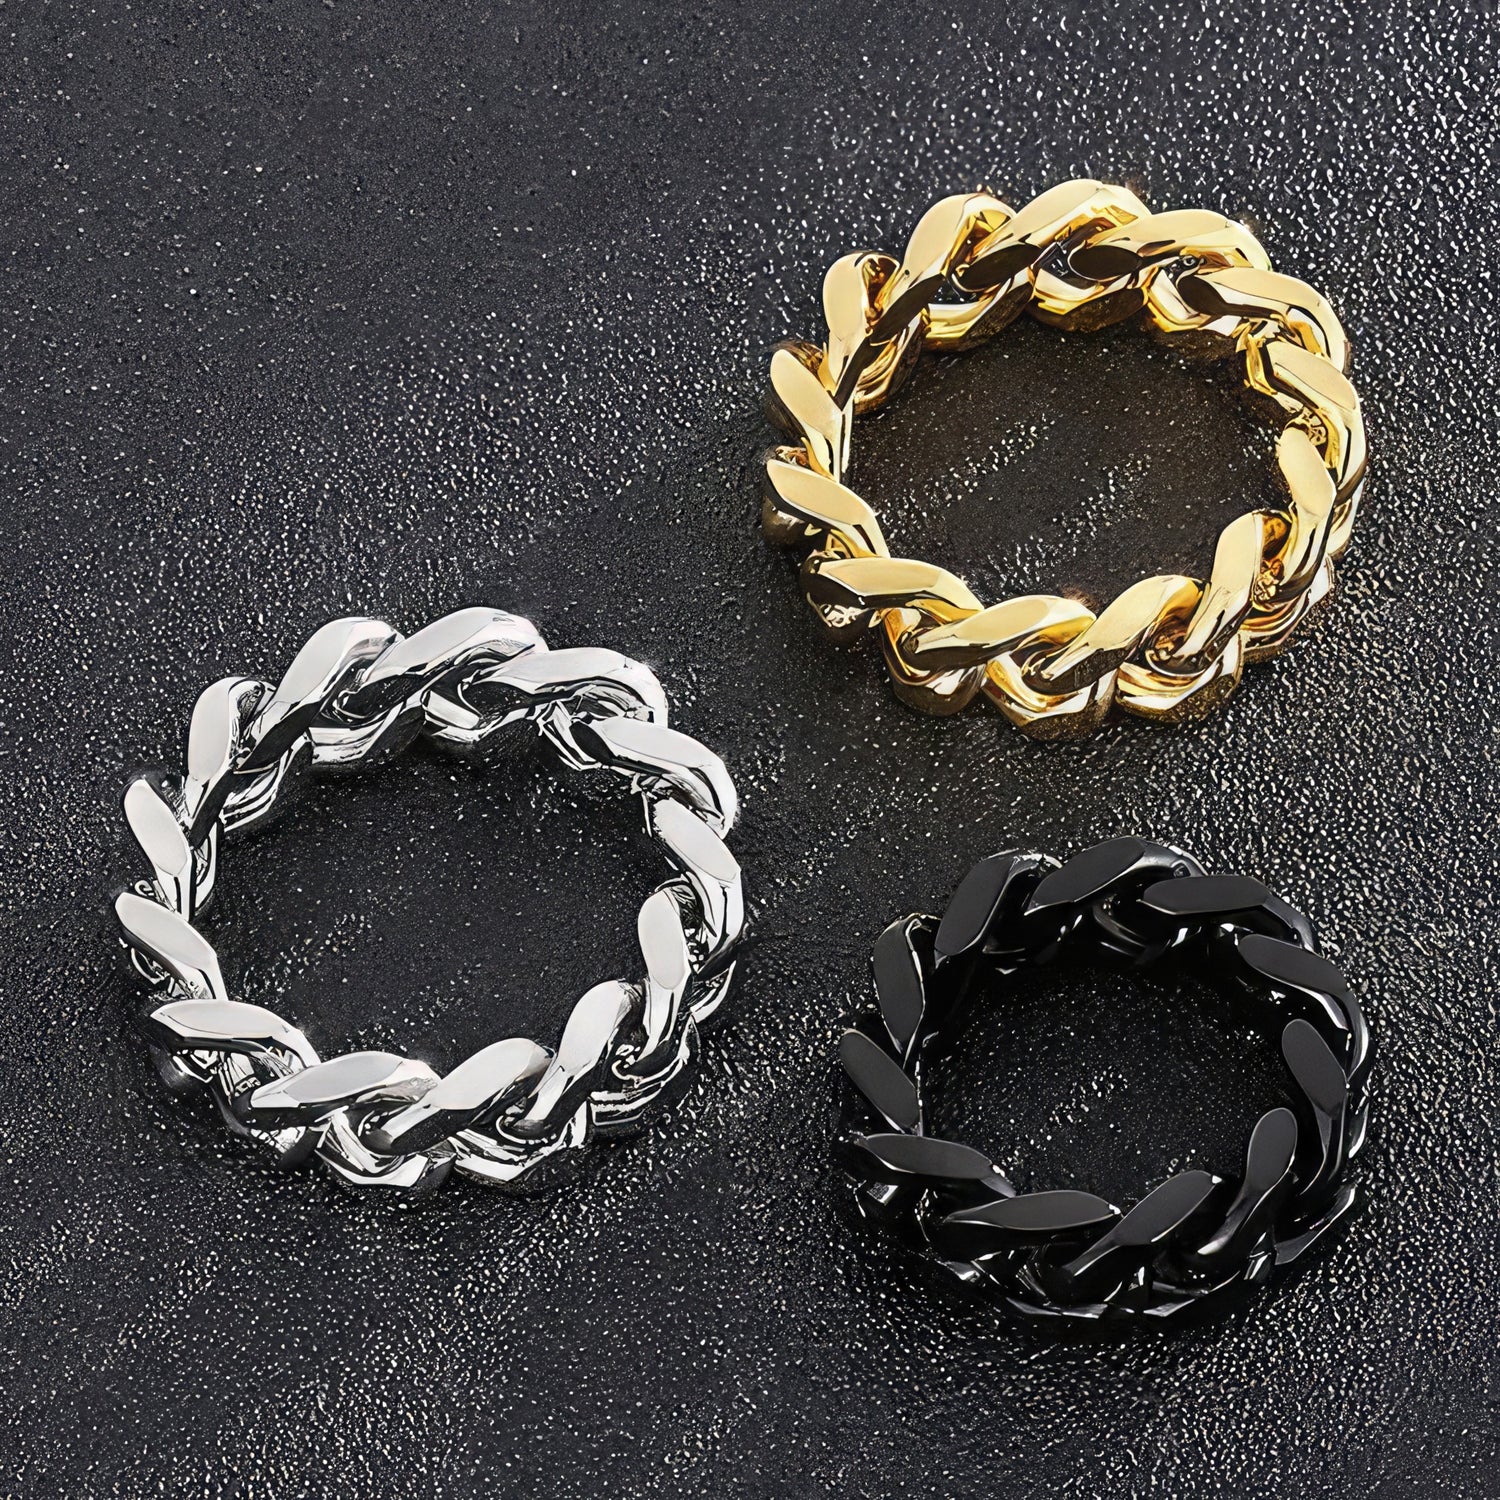 Powerful Stainless Steel Chain Link Ring